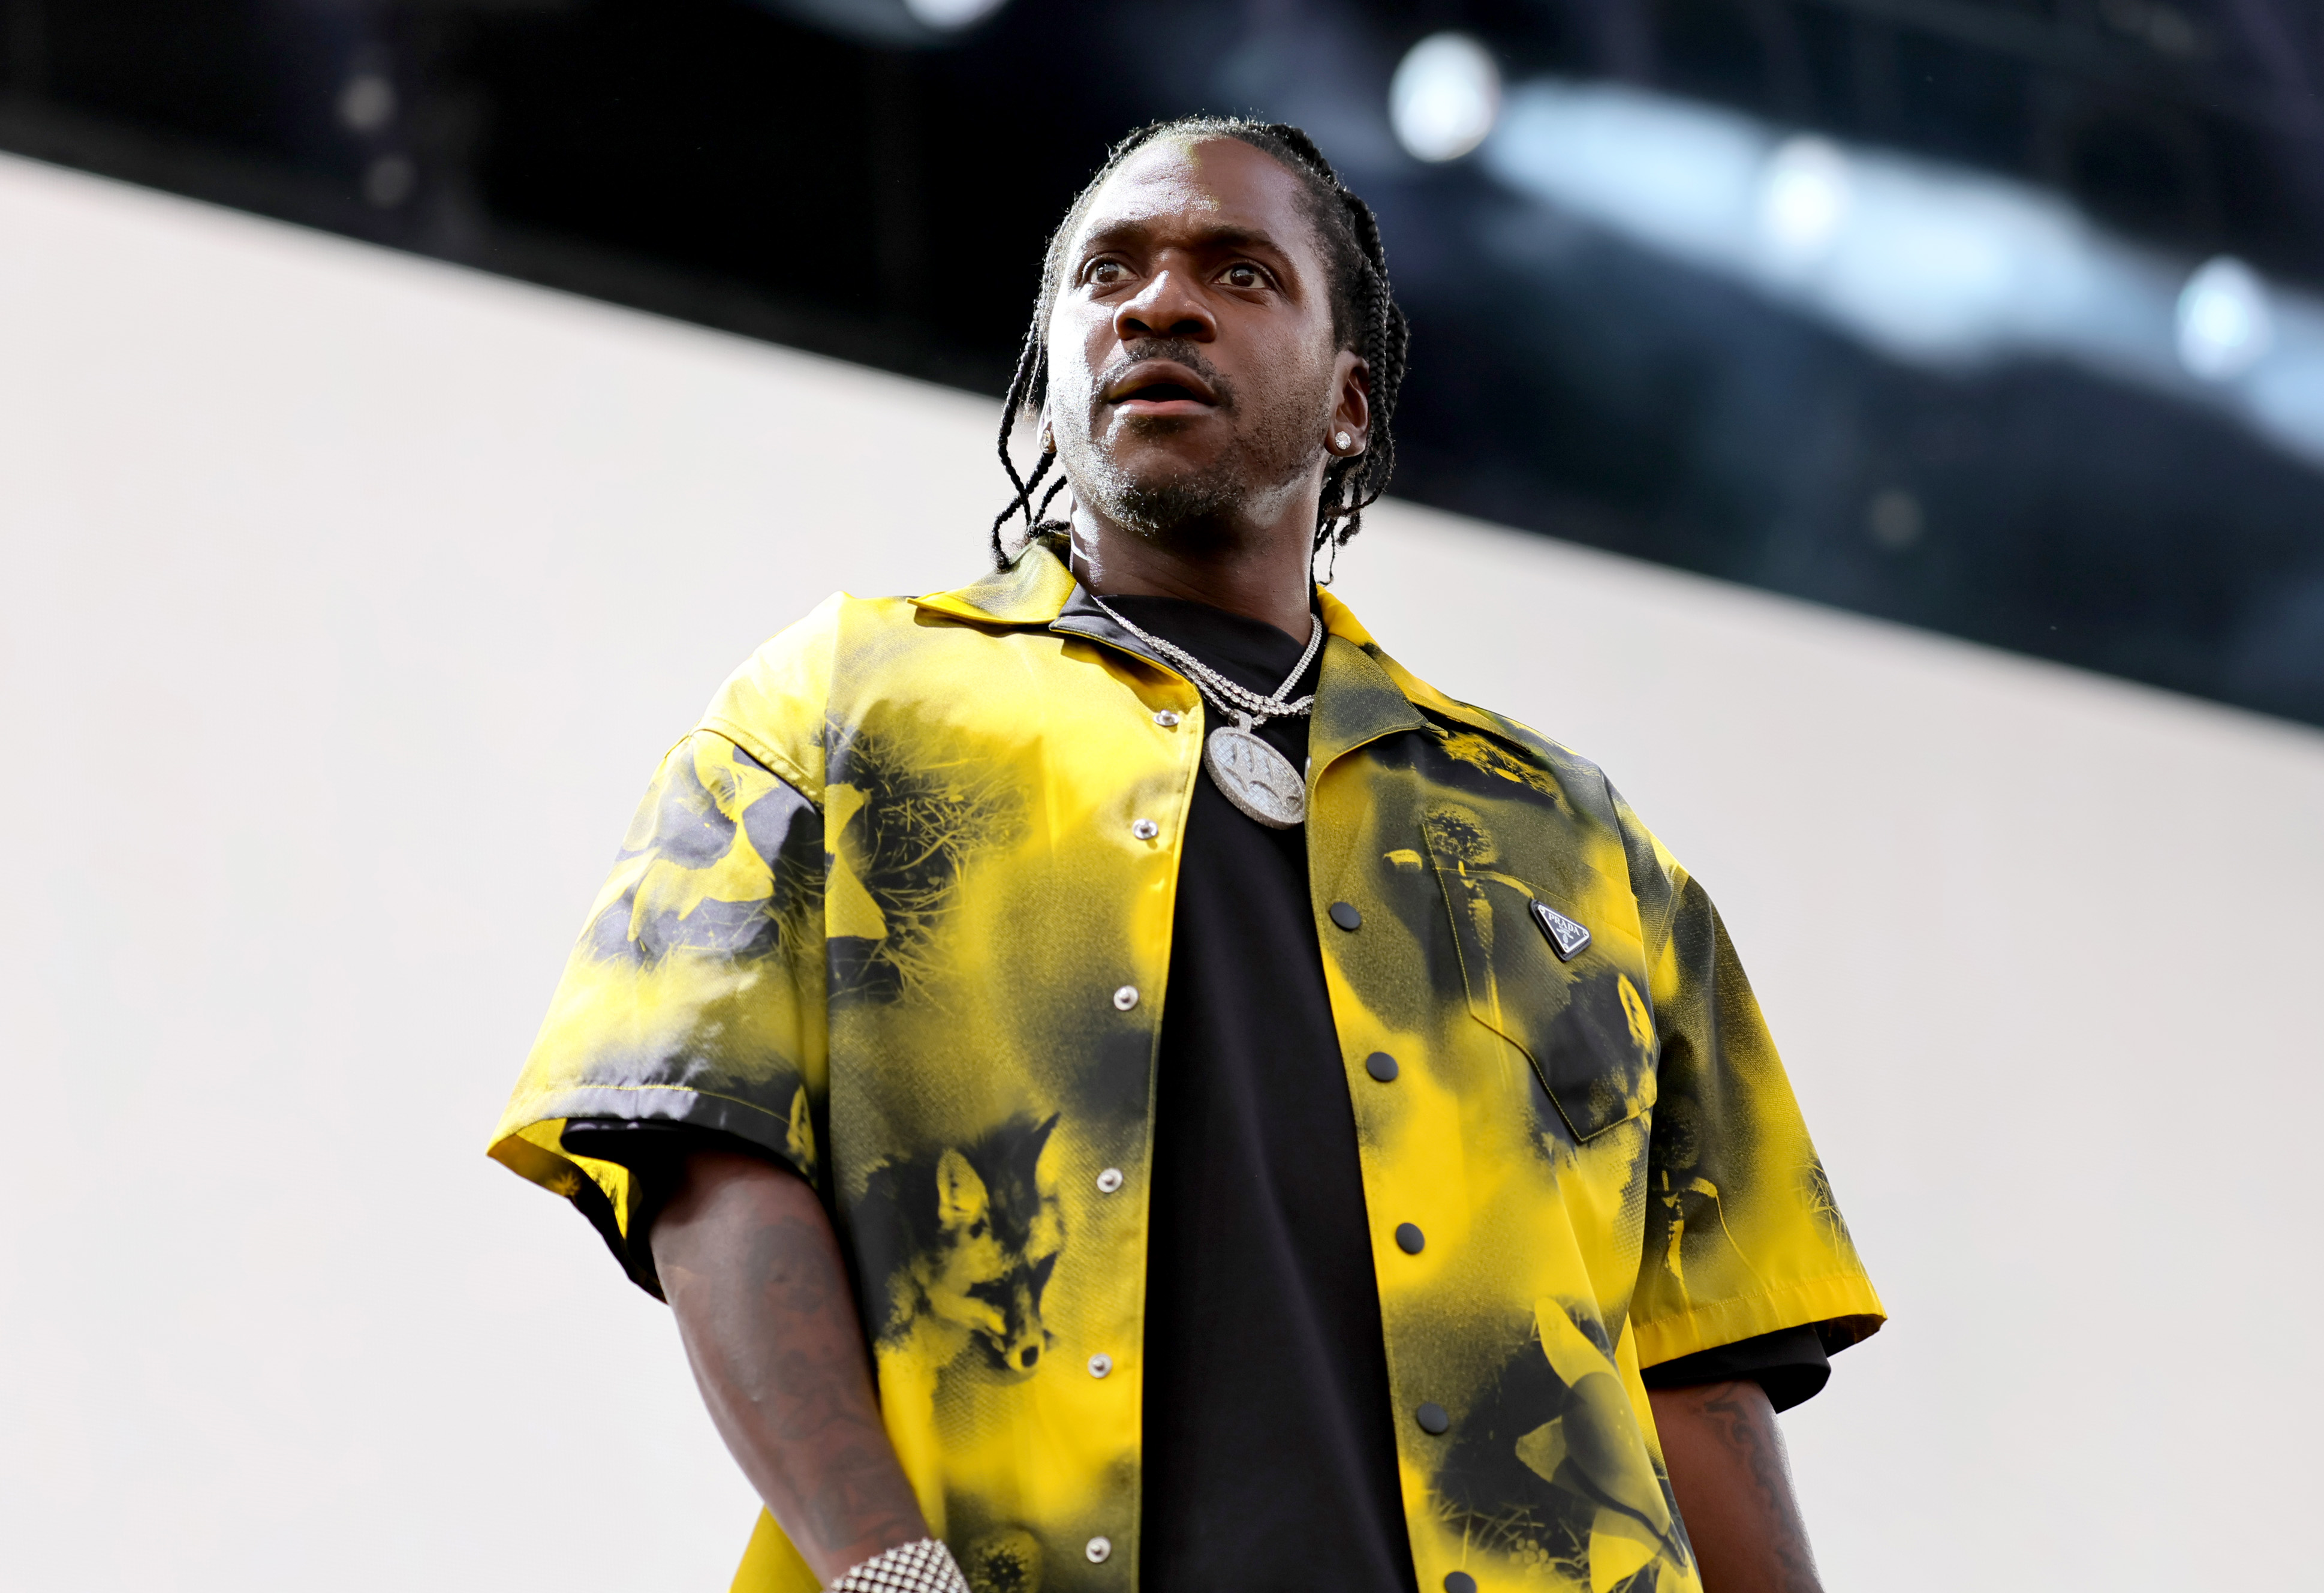 Pusha T Says He’s No Longer With Kanye West’s G.O.O.D. Music